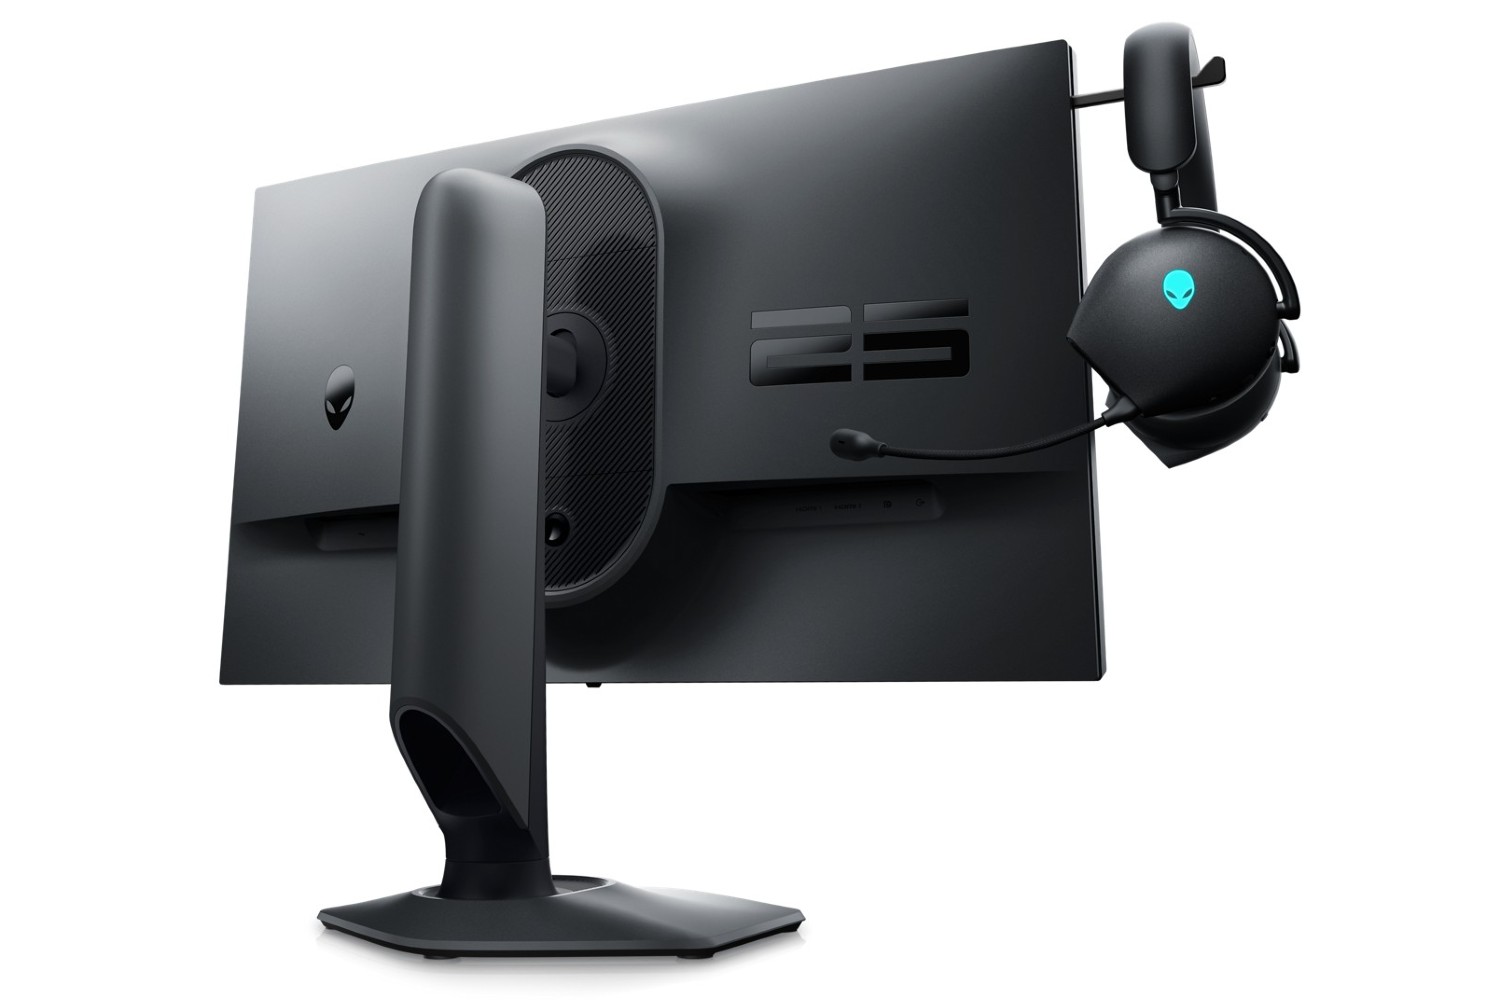 An Alienware monitor with a headset holder.